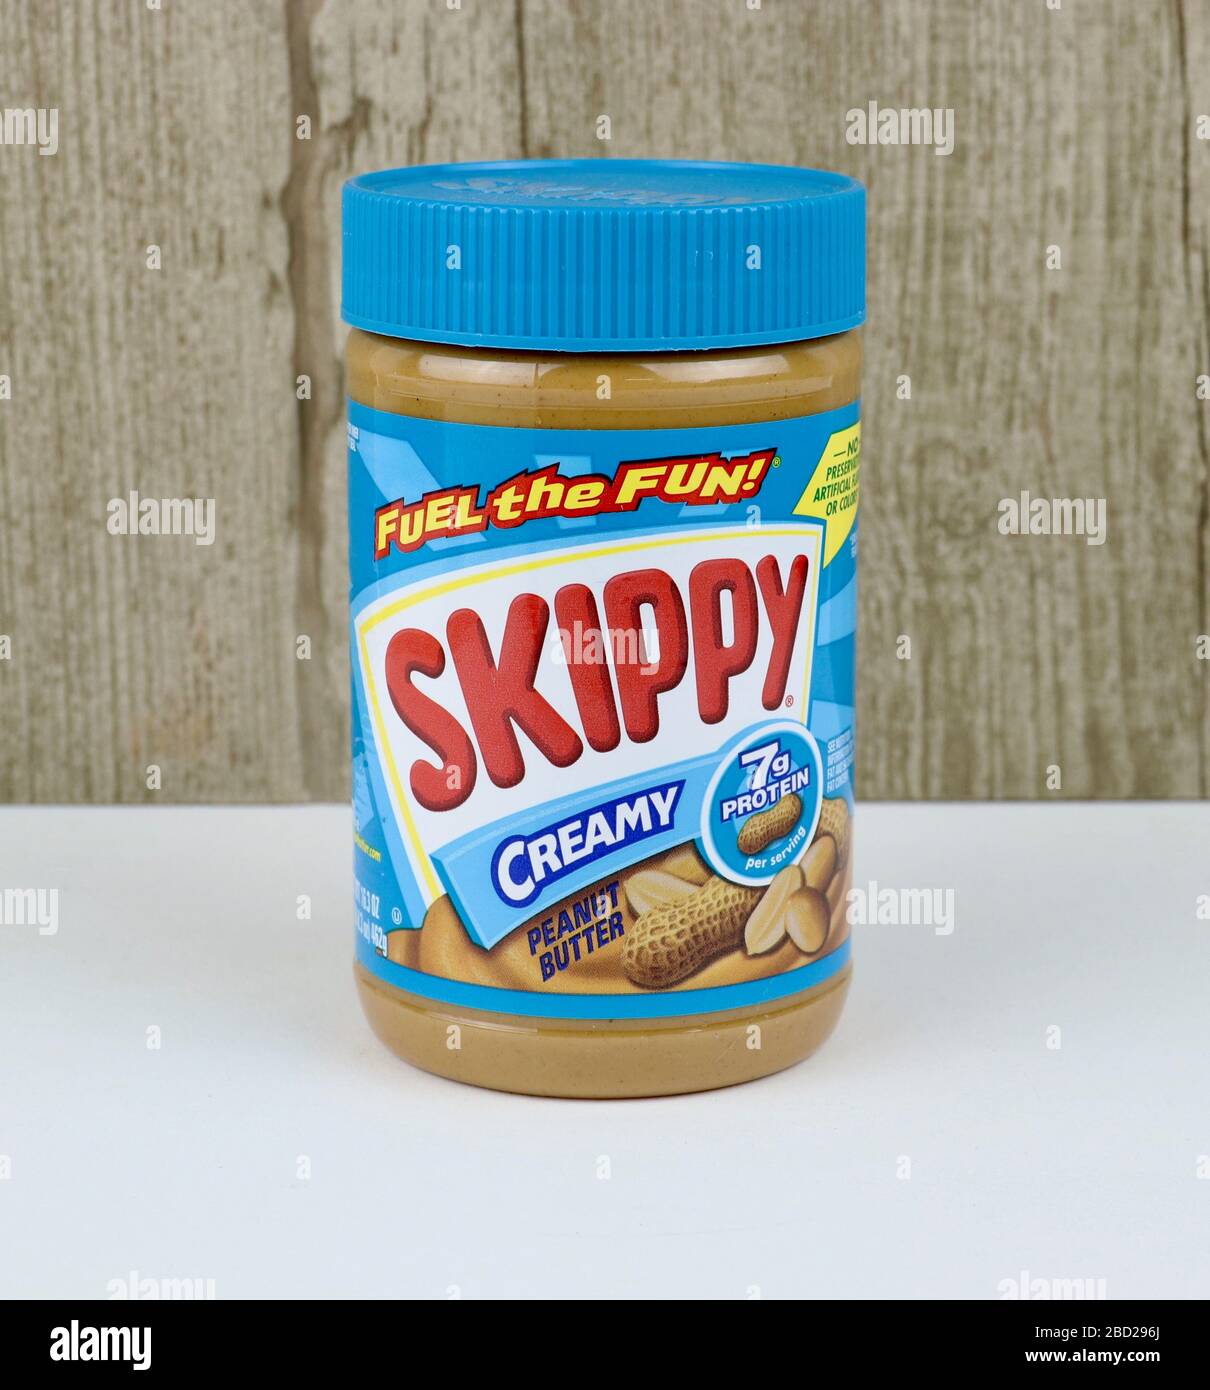 Spencer, Wisconsin, U.S.A. , April, 5, 2020    Jar of Skippy Creamy Peanut Butter    Skippy was first introduced in 1932 Stock Photo